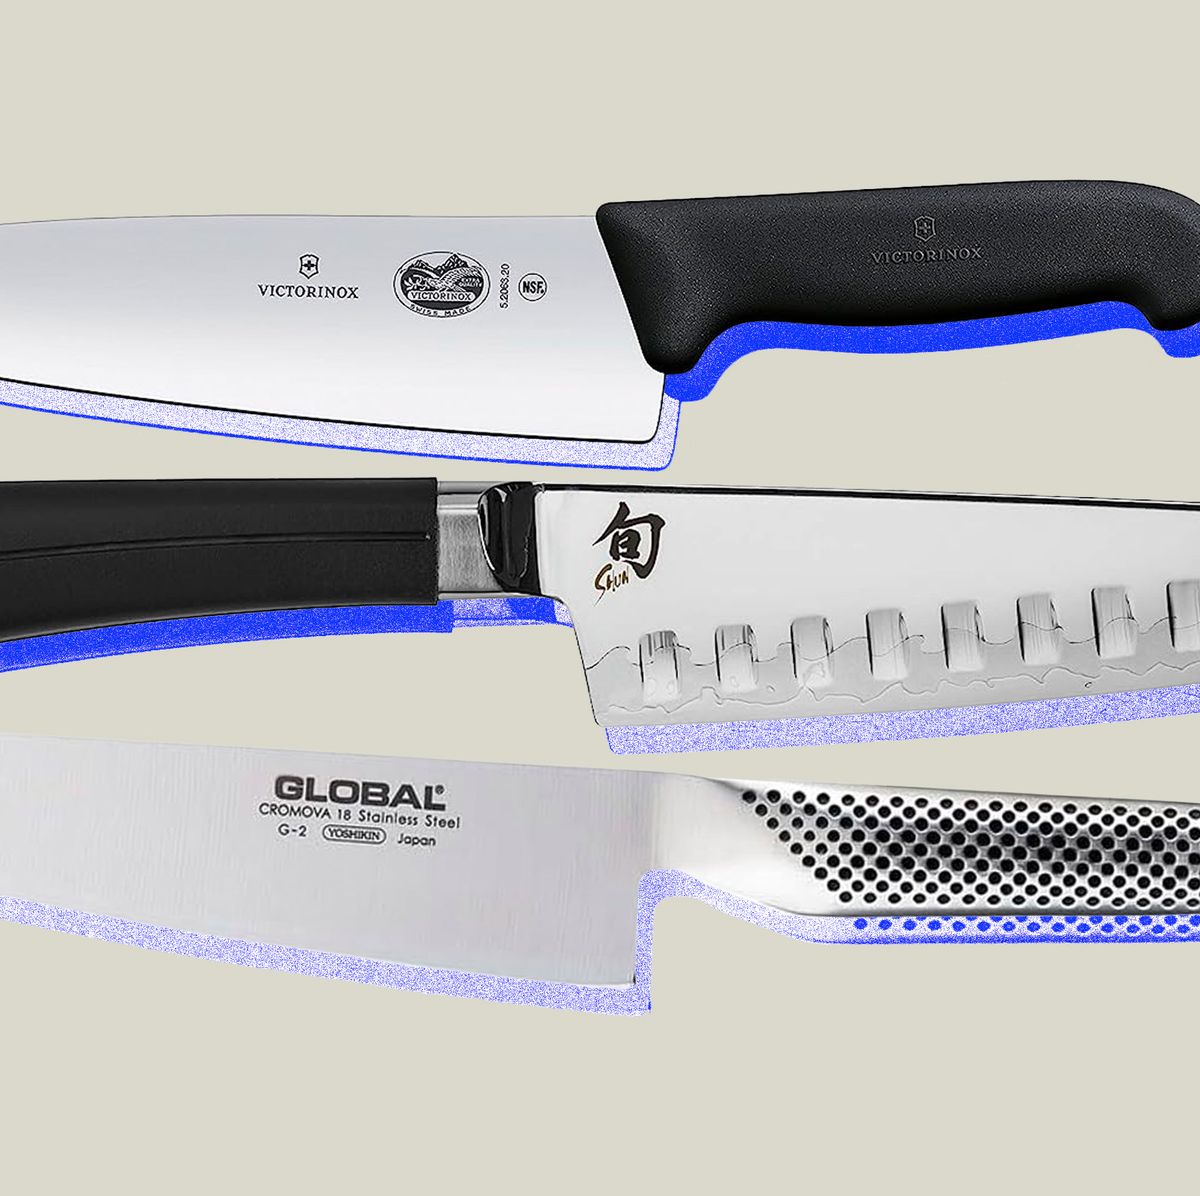 The $3 Chef's Knife Everyone's Talking About - Cheap Chef's Knife from  Brandless